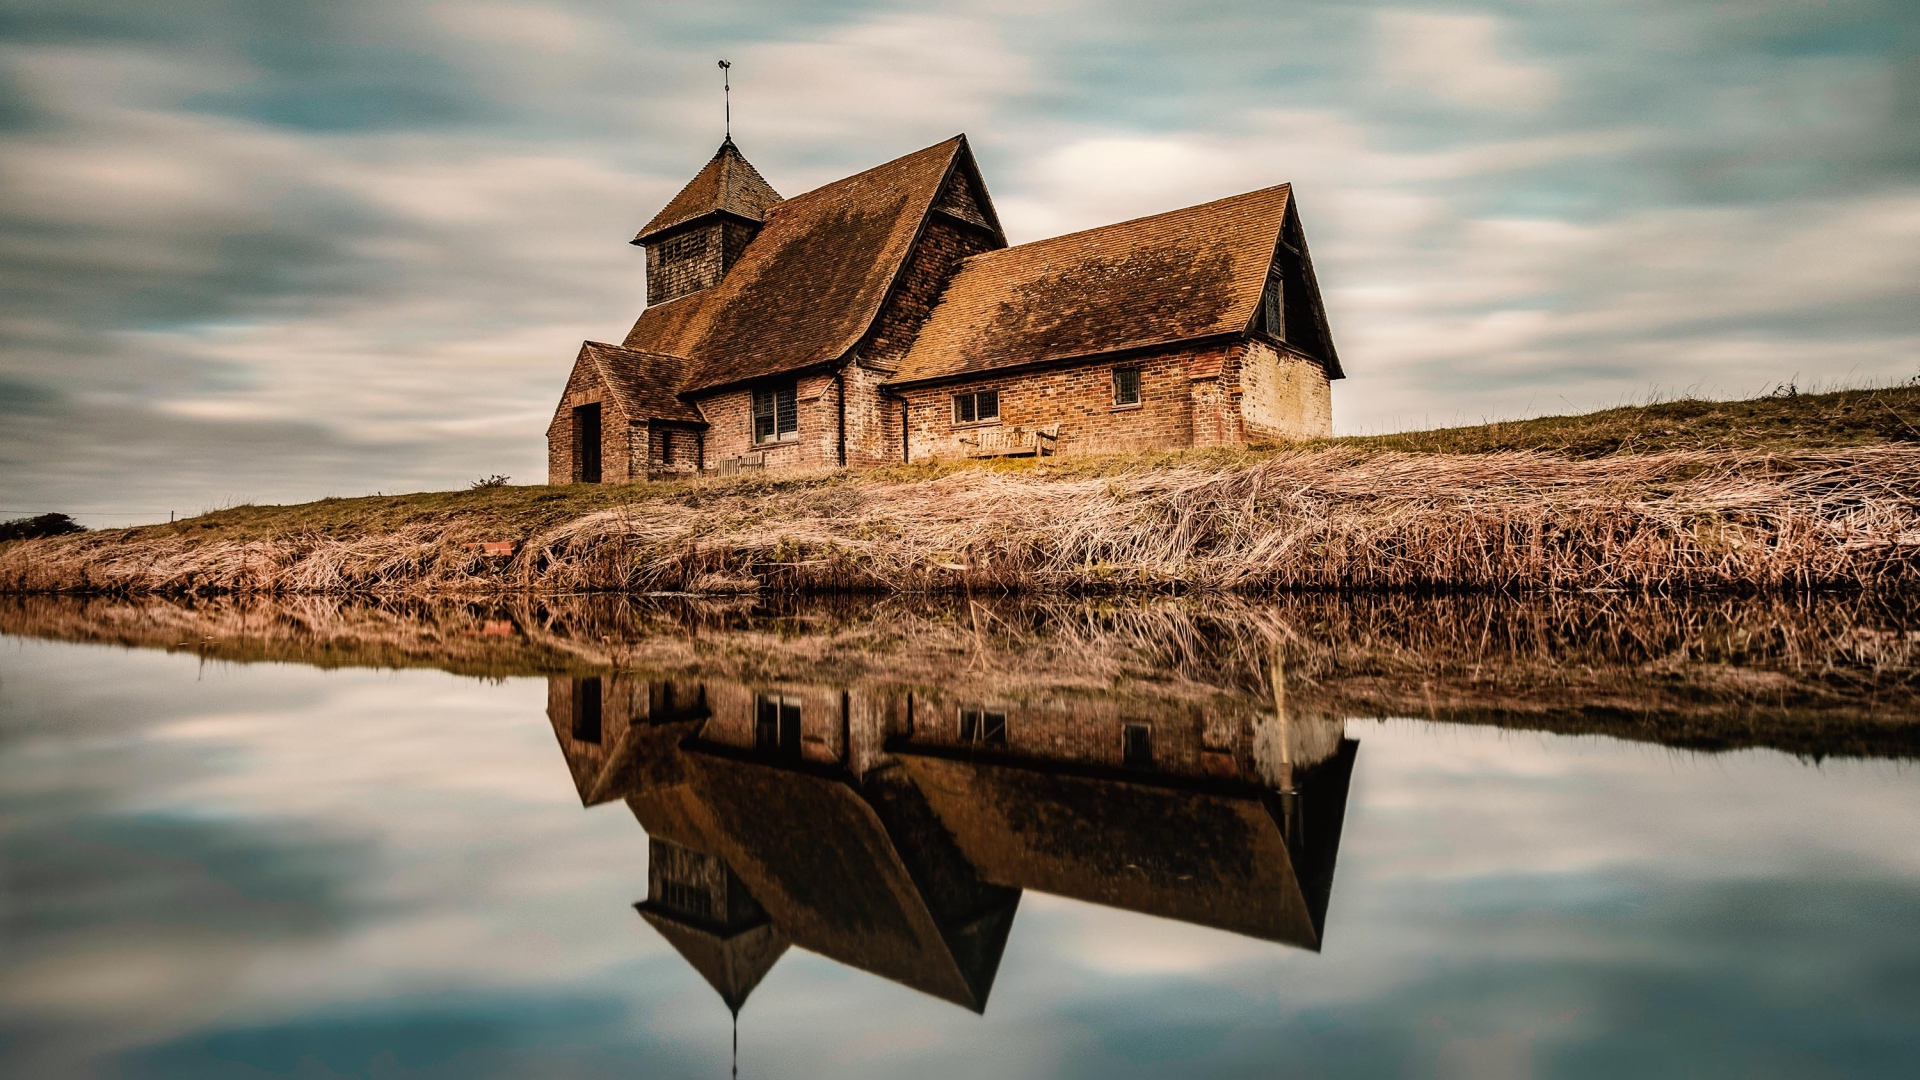 An old house by the river is reflected in the water